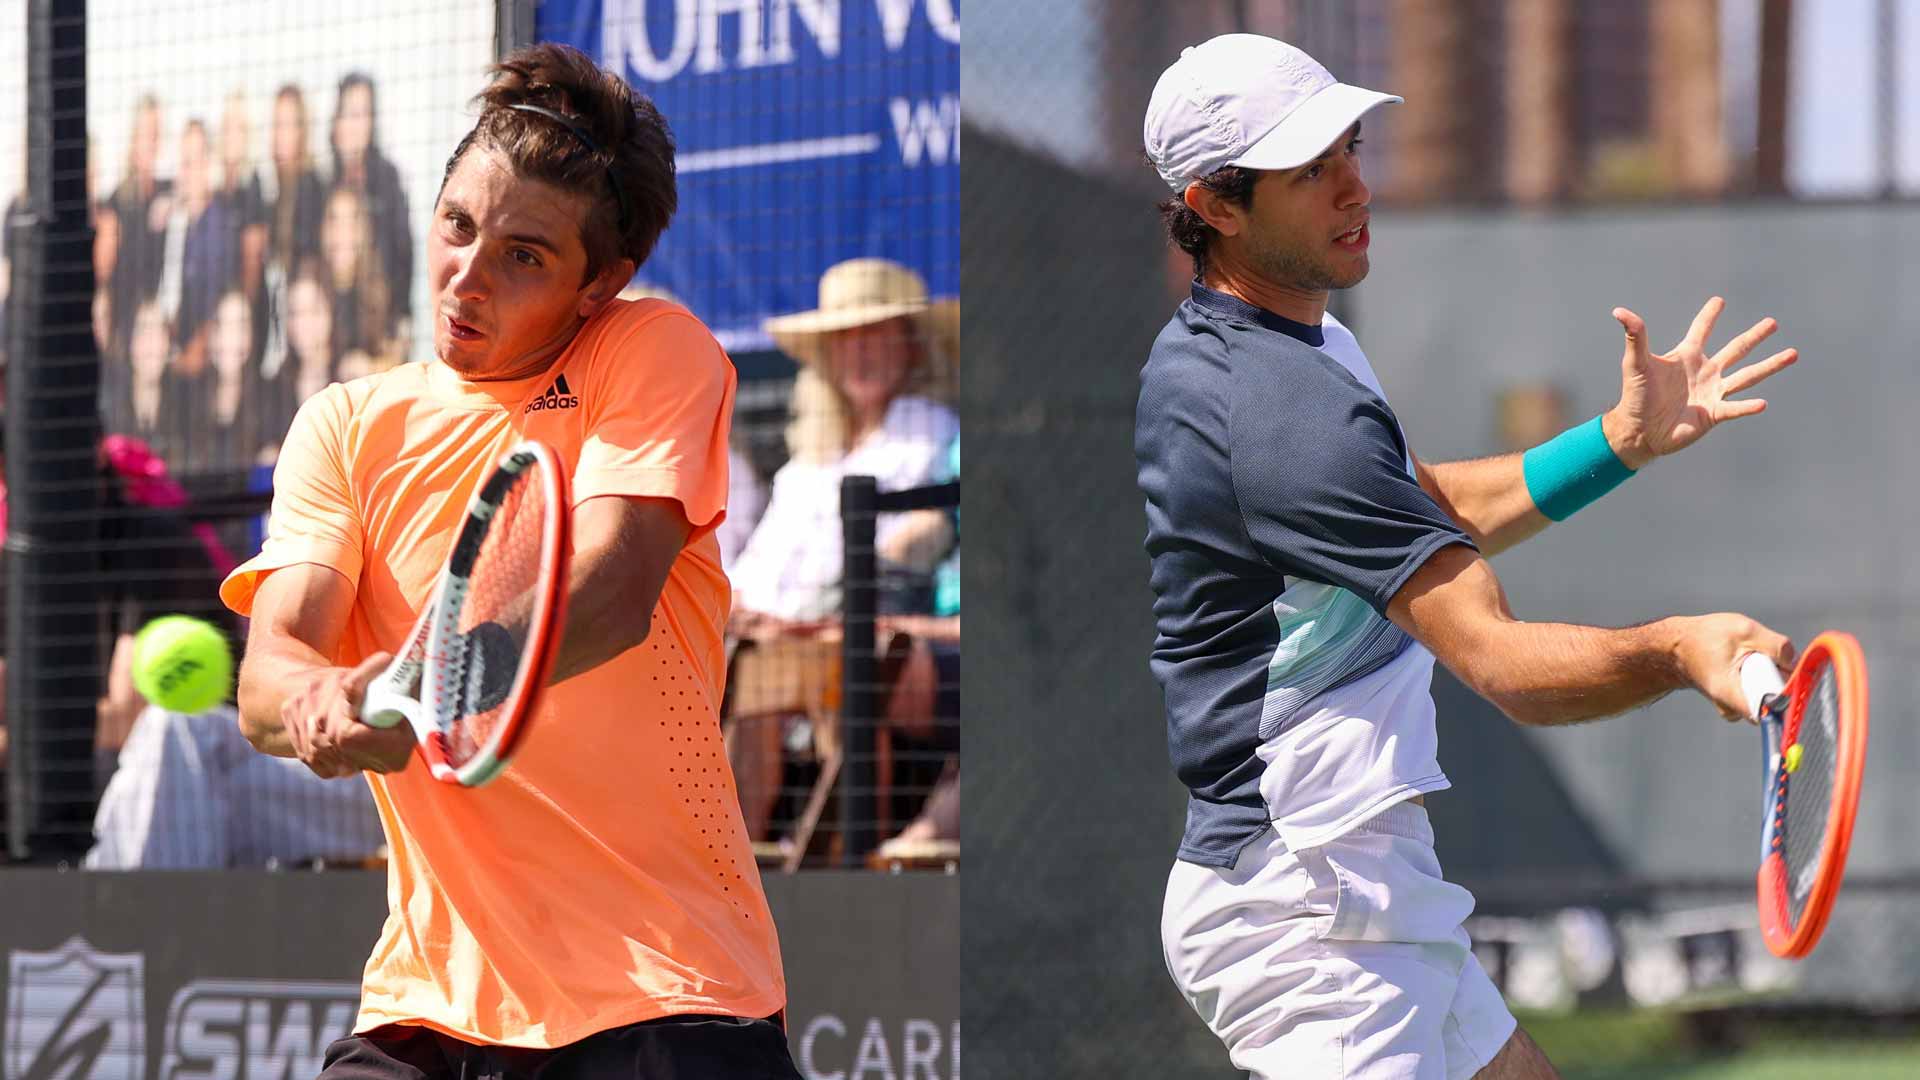 Alexander Shevchenko (left) and Nuno Borges in action Saturday at the Phoenix Challenger.